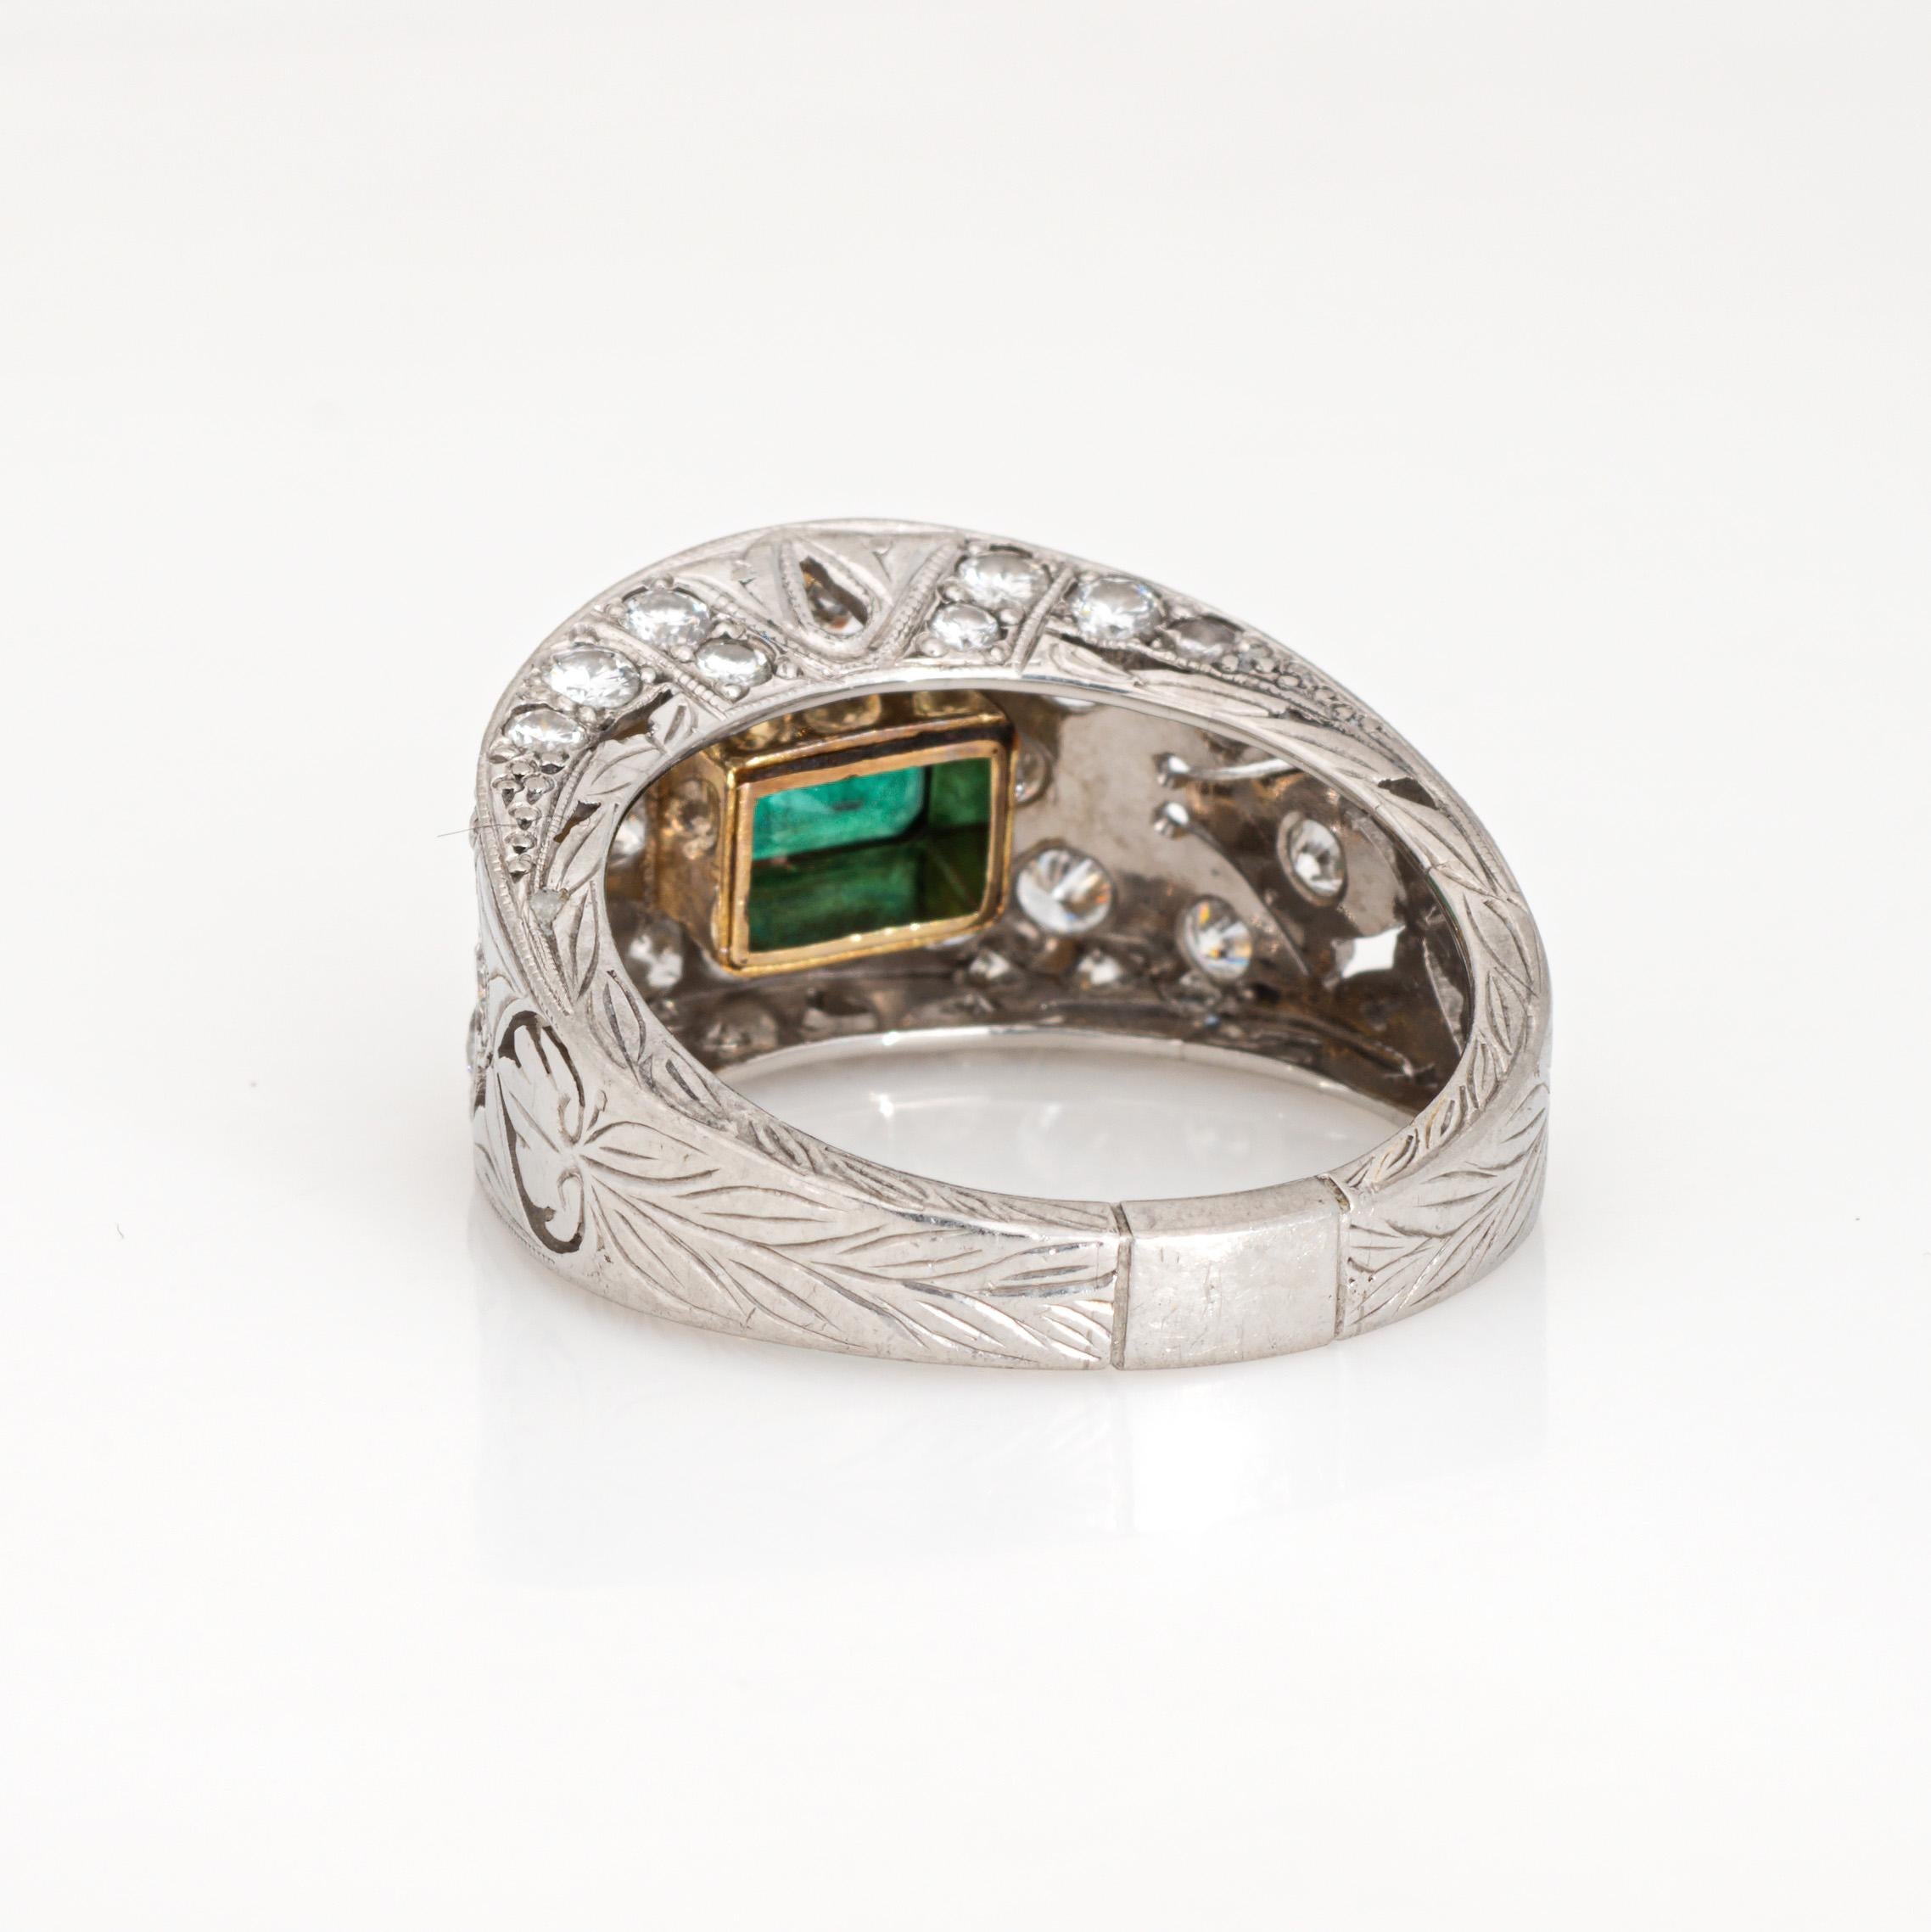 Emerald Diamond Ring Estate Etched Platinum Wide Band Sz 7.5 Estate Jewelry In Good Condition For Sale In Torrance, CA